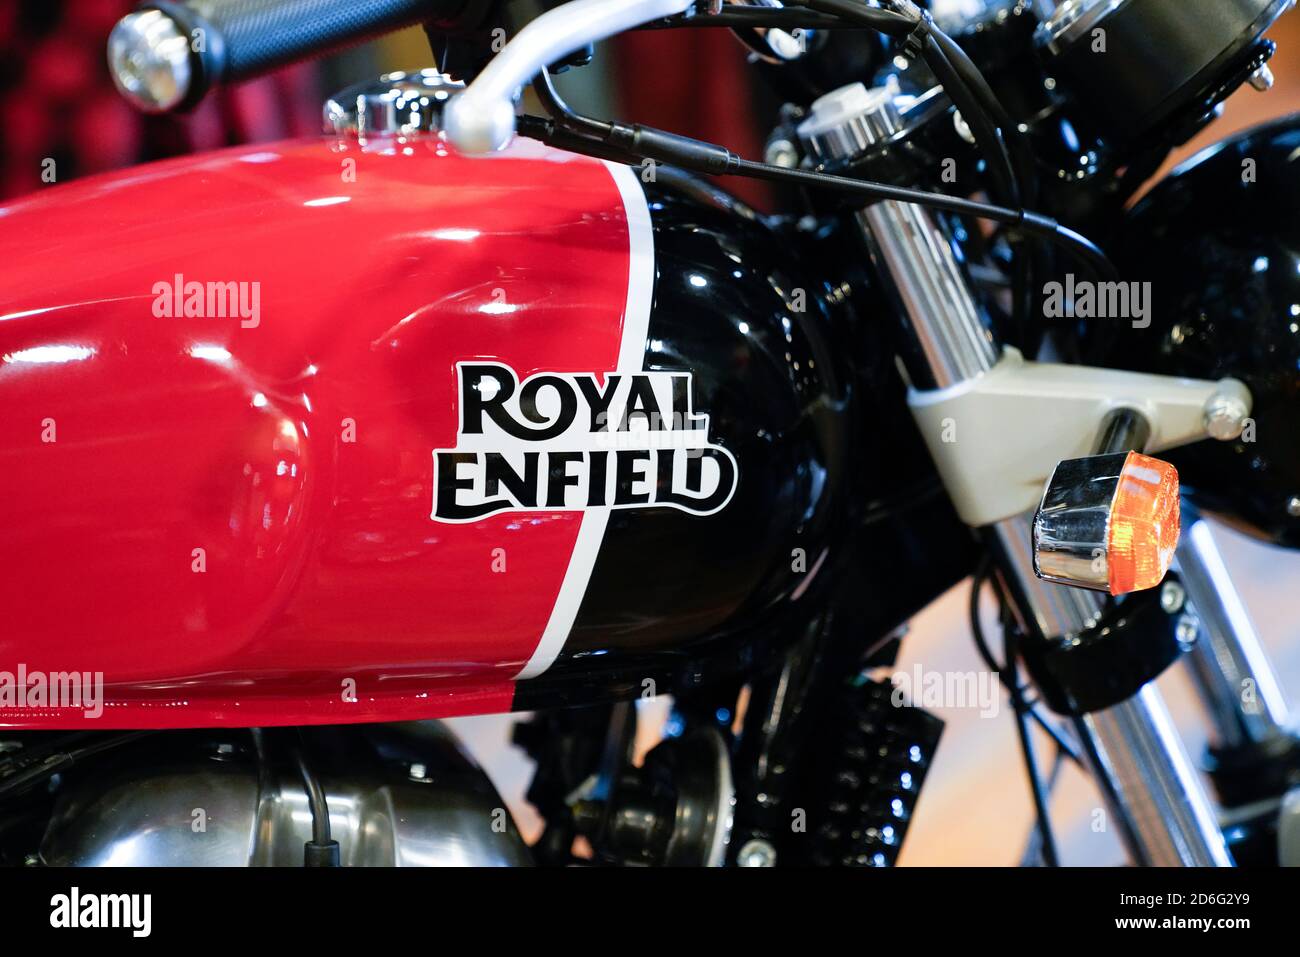 Bordeaux , Aquitaine / France - 10 10 2020 : Royal Enfield logo and text sign on Indian motorbike fuel petrol tank red black of vintage historical mot Stock Photo